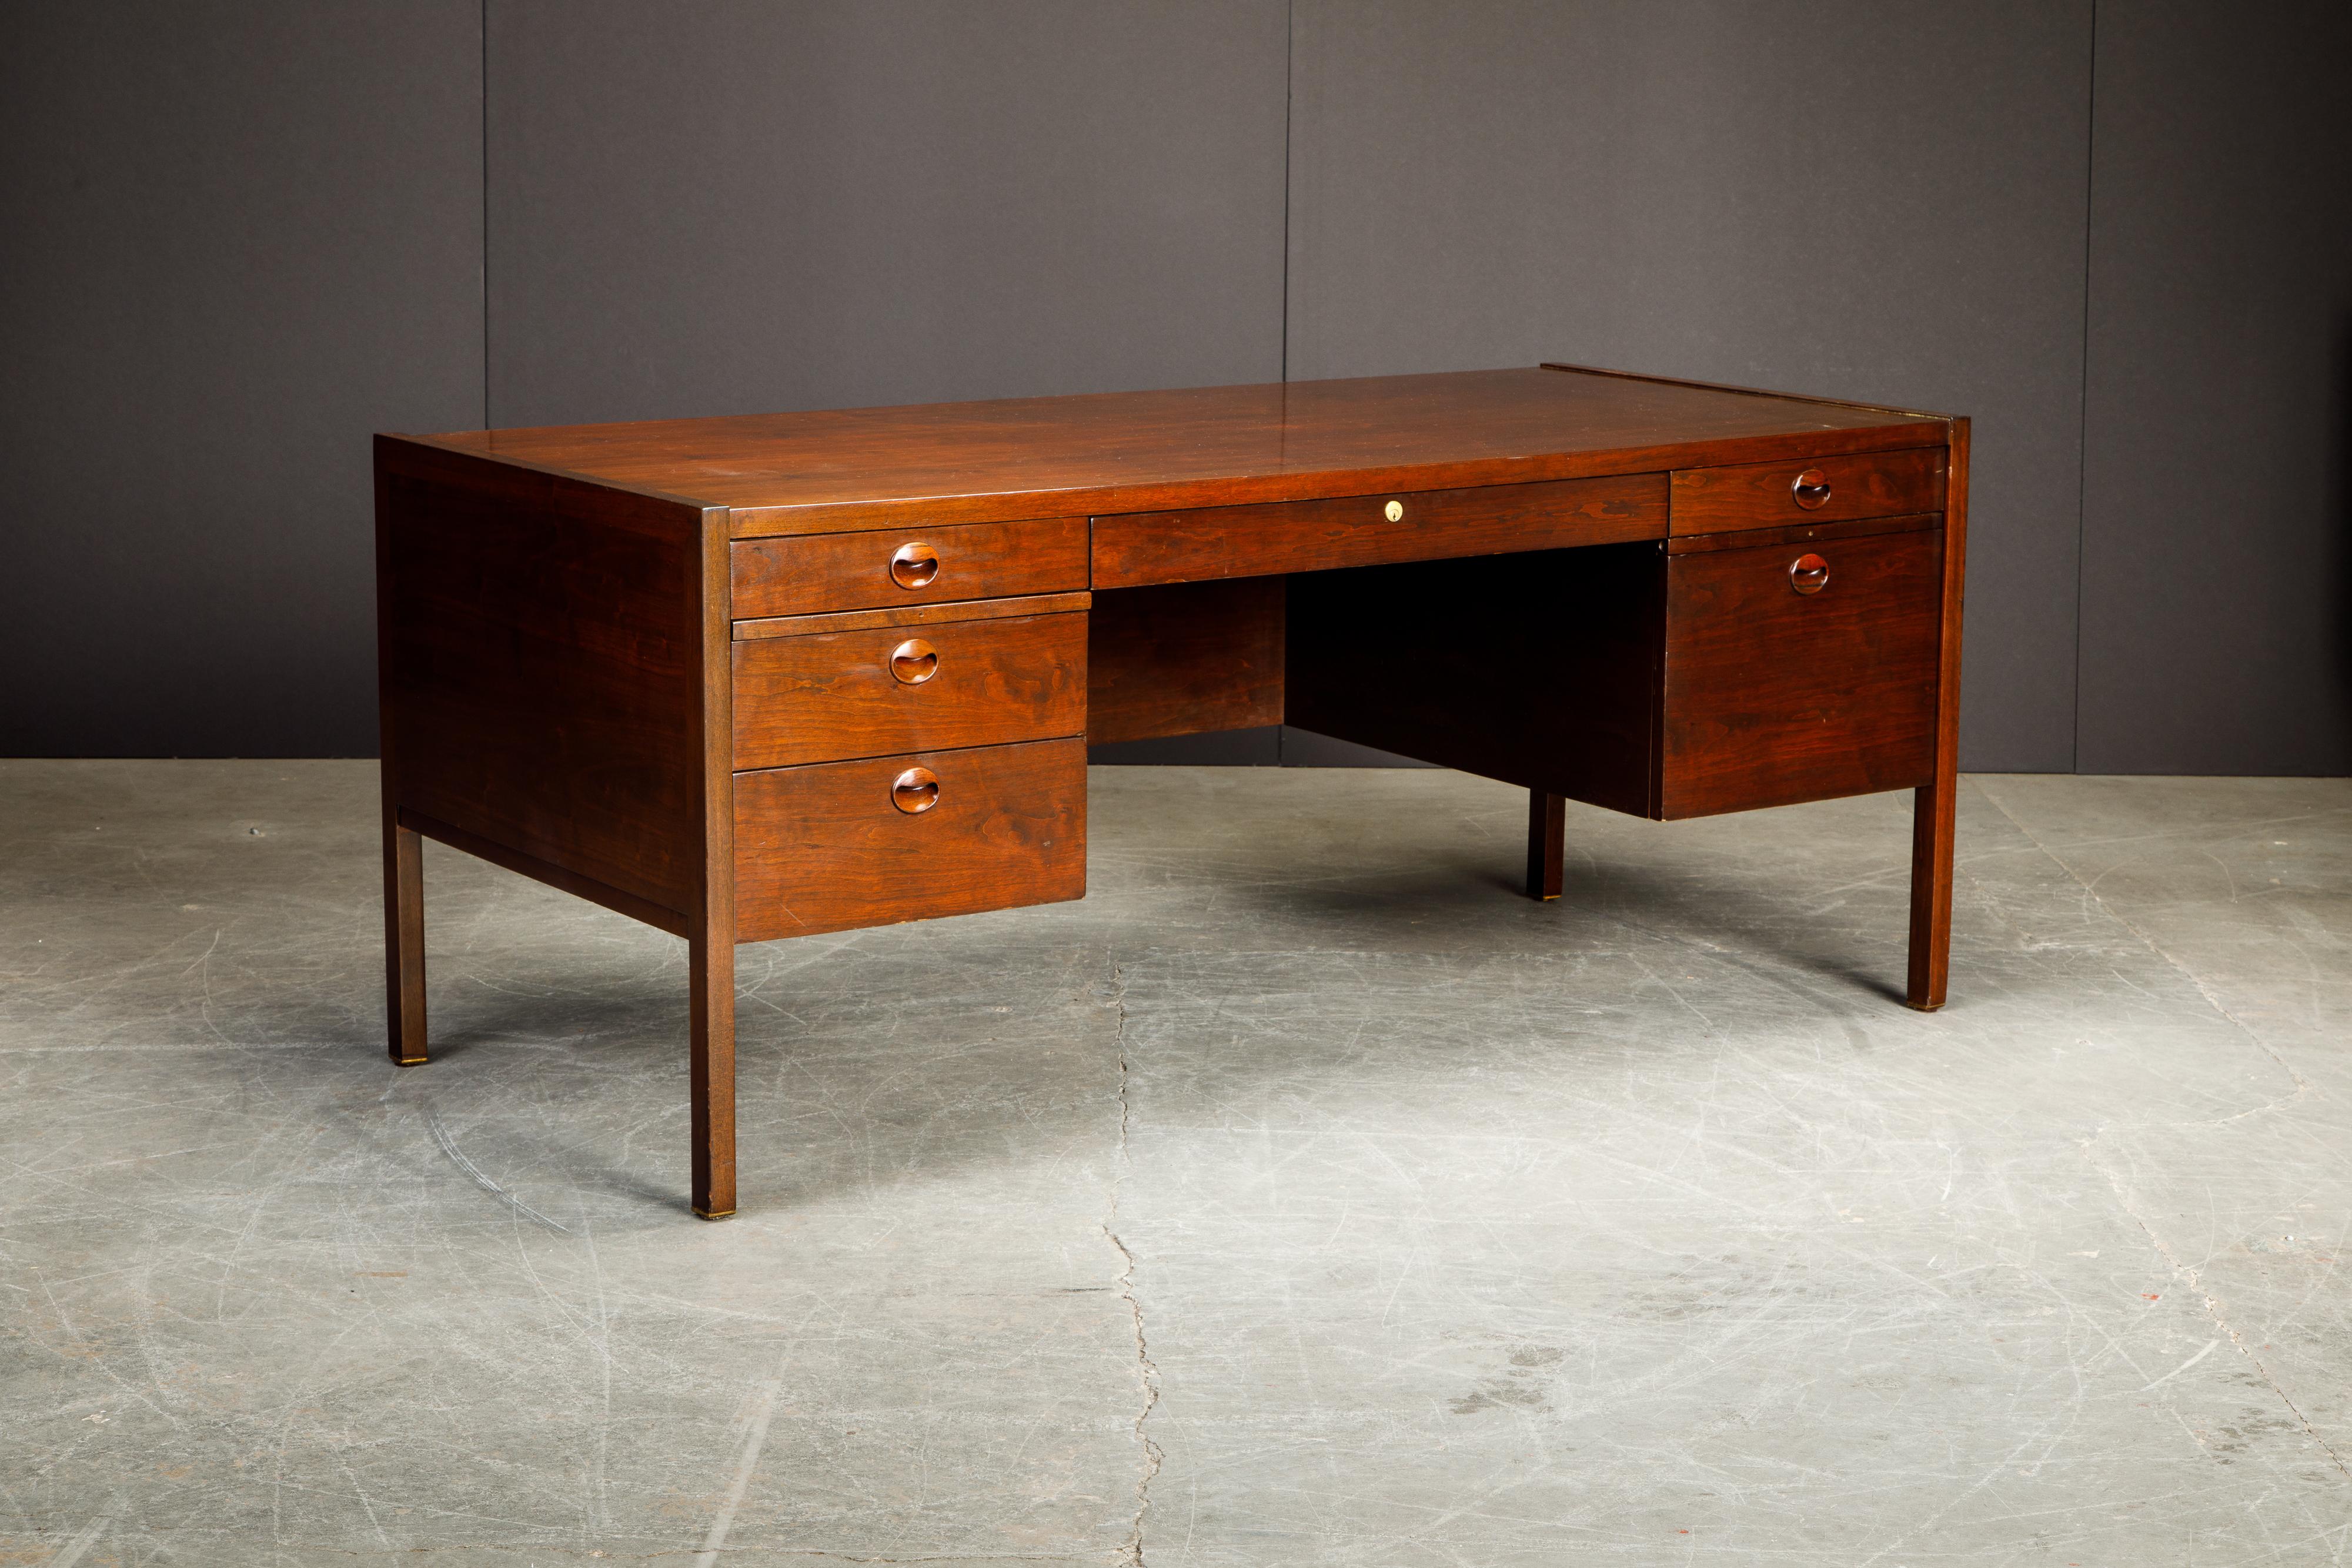 American Rosewood and Mahogany Executive Desk by Edward Wormley for Dunbar, 1963, Signed